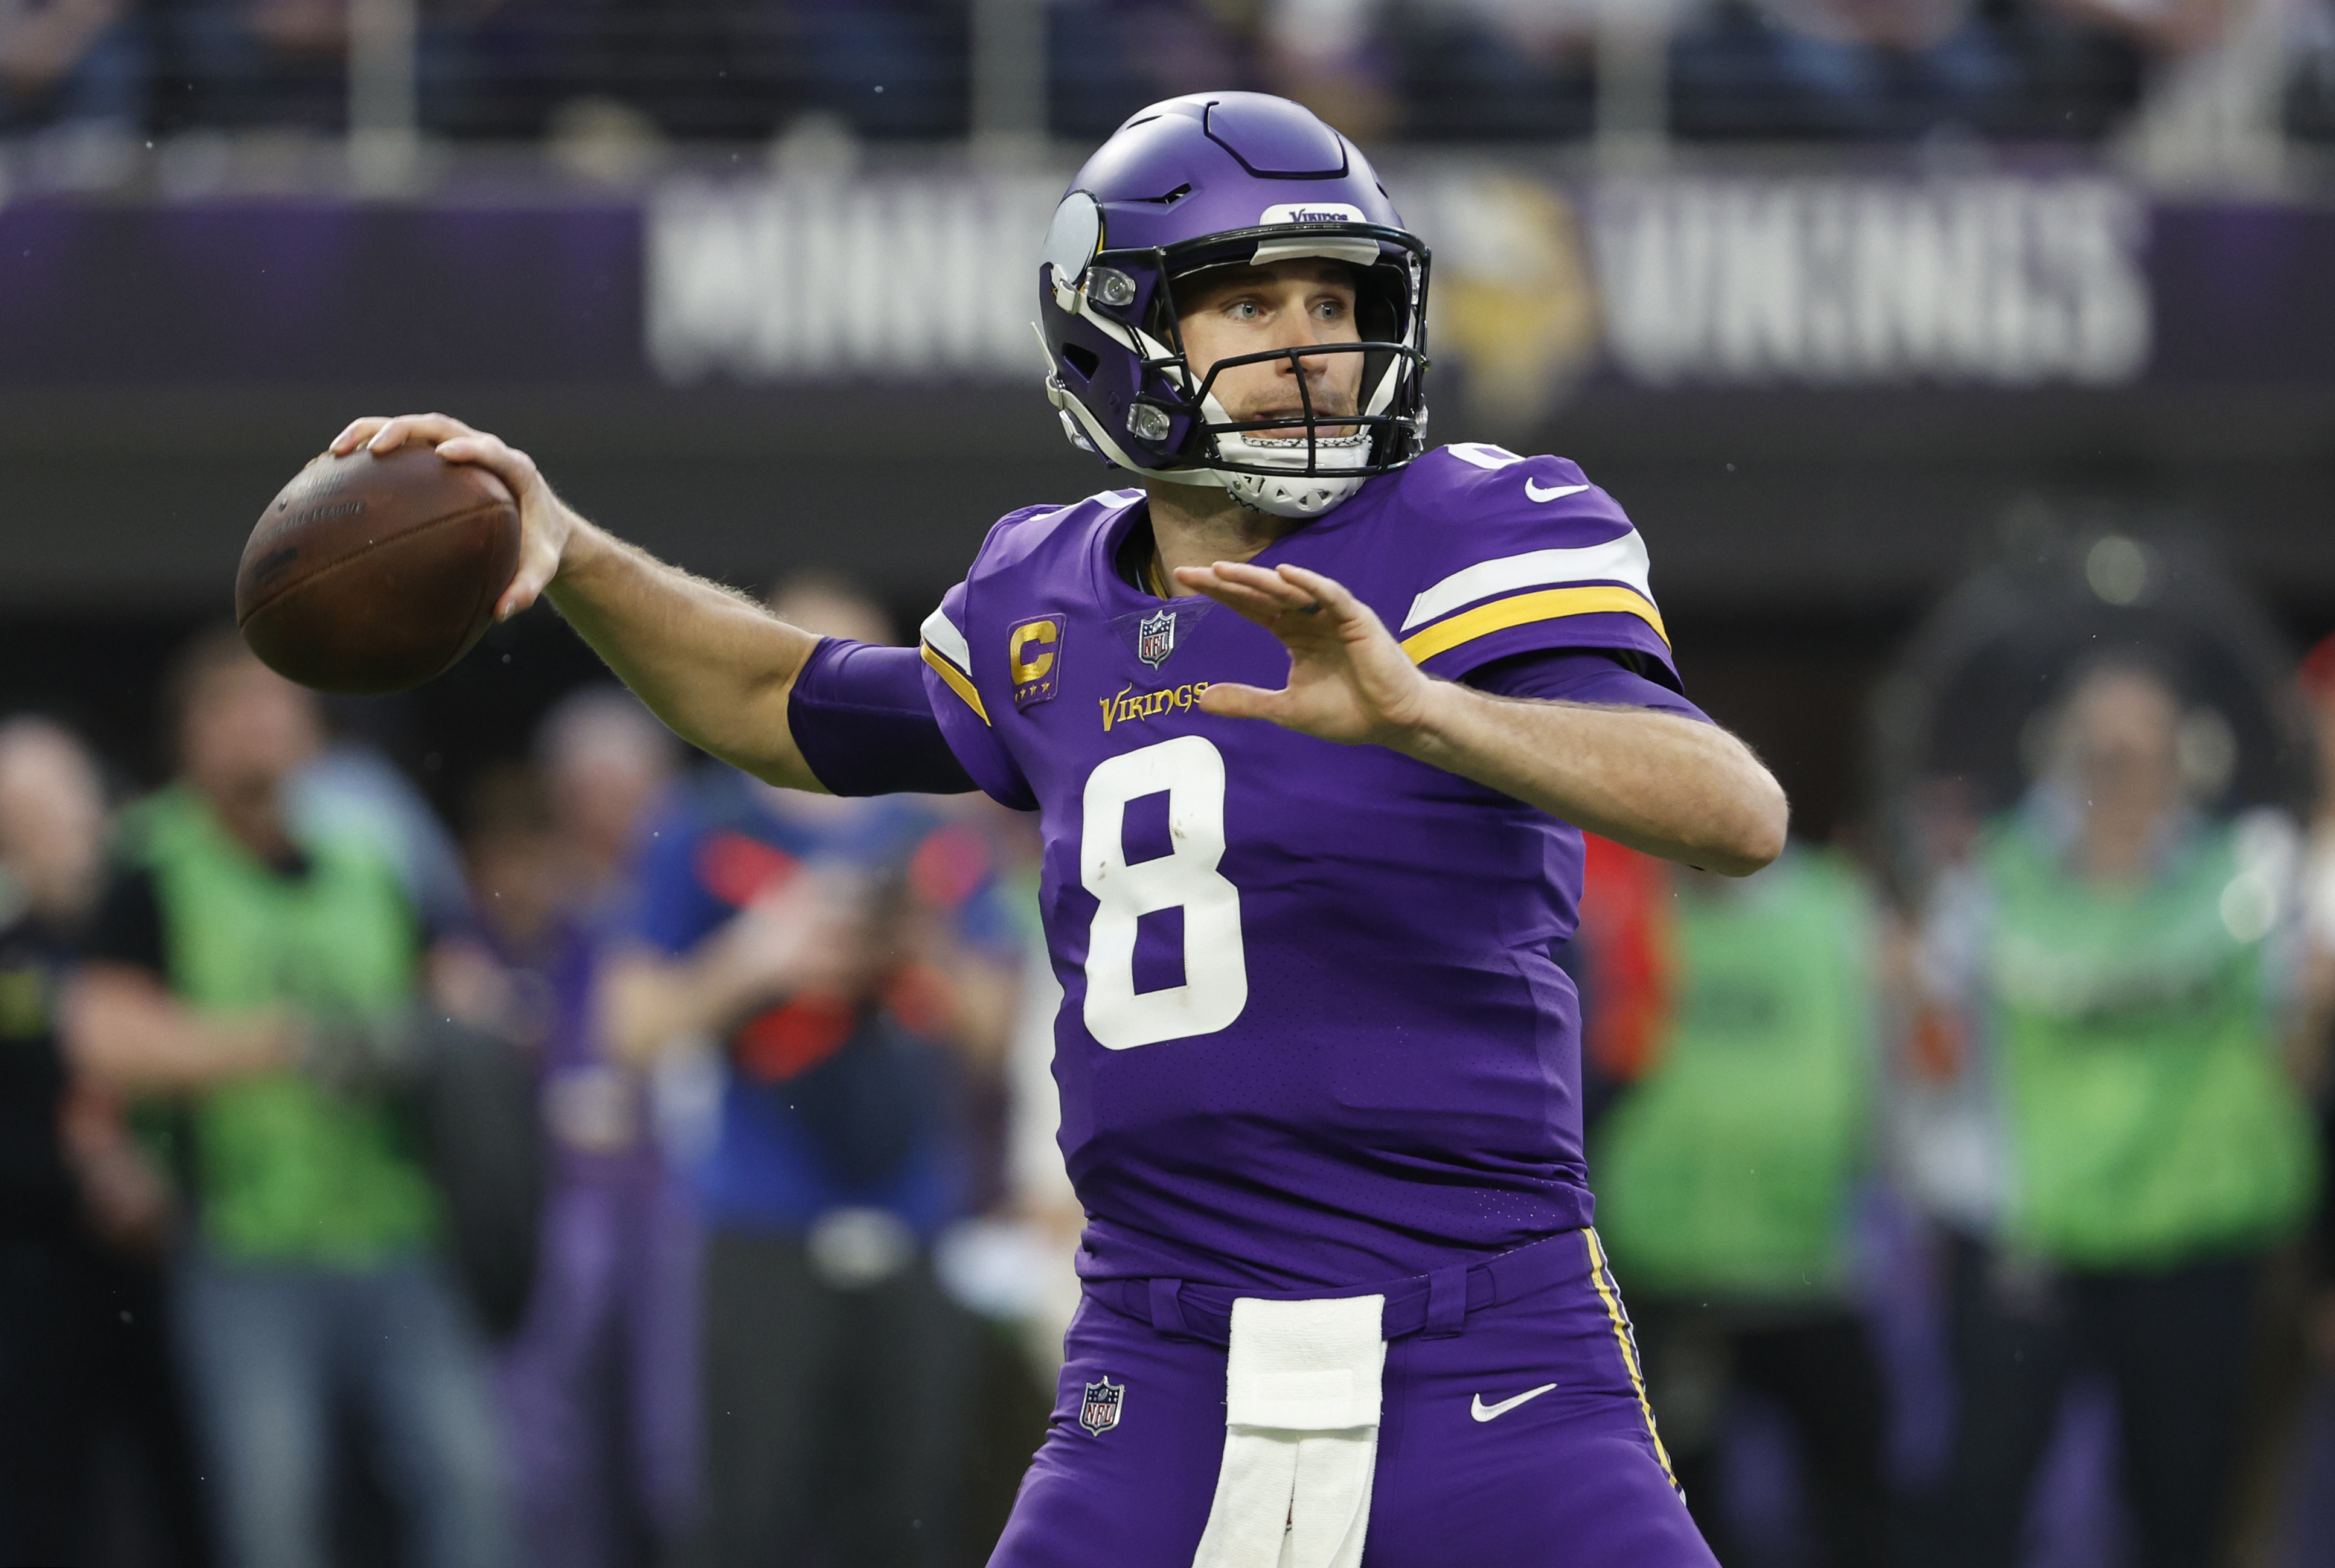 Quarterback Kirk Counsins of the Minnesota Vikings passes in the NFL National Football Conference Wild Card Game against the New York Giants at U.S. Bank Stadium in Minneapolis, Minnesota, January 15, 2023. /CFP